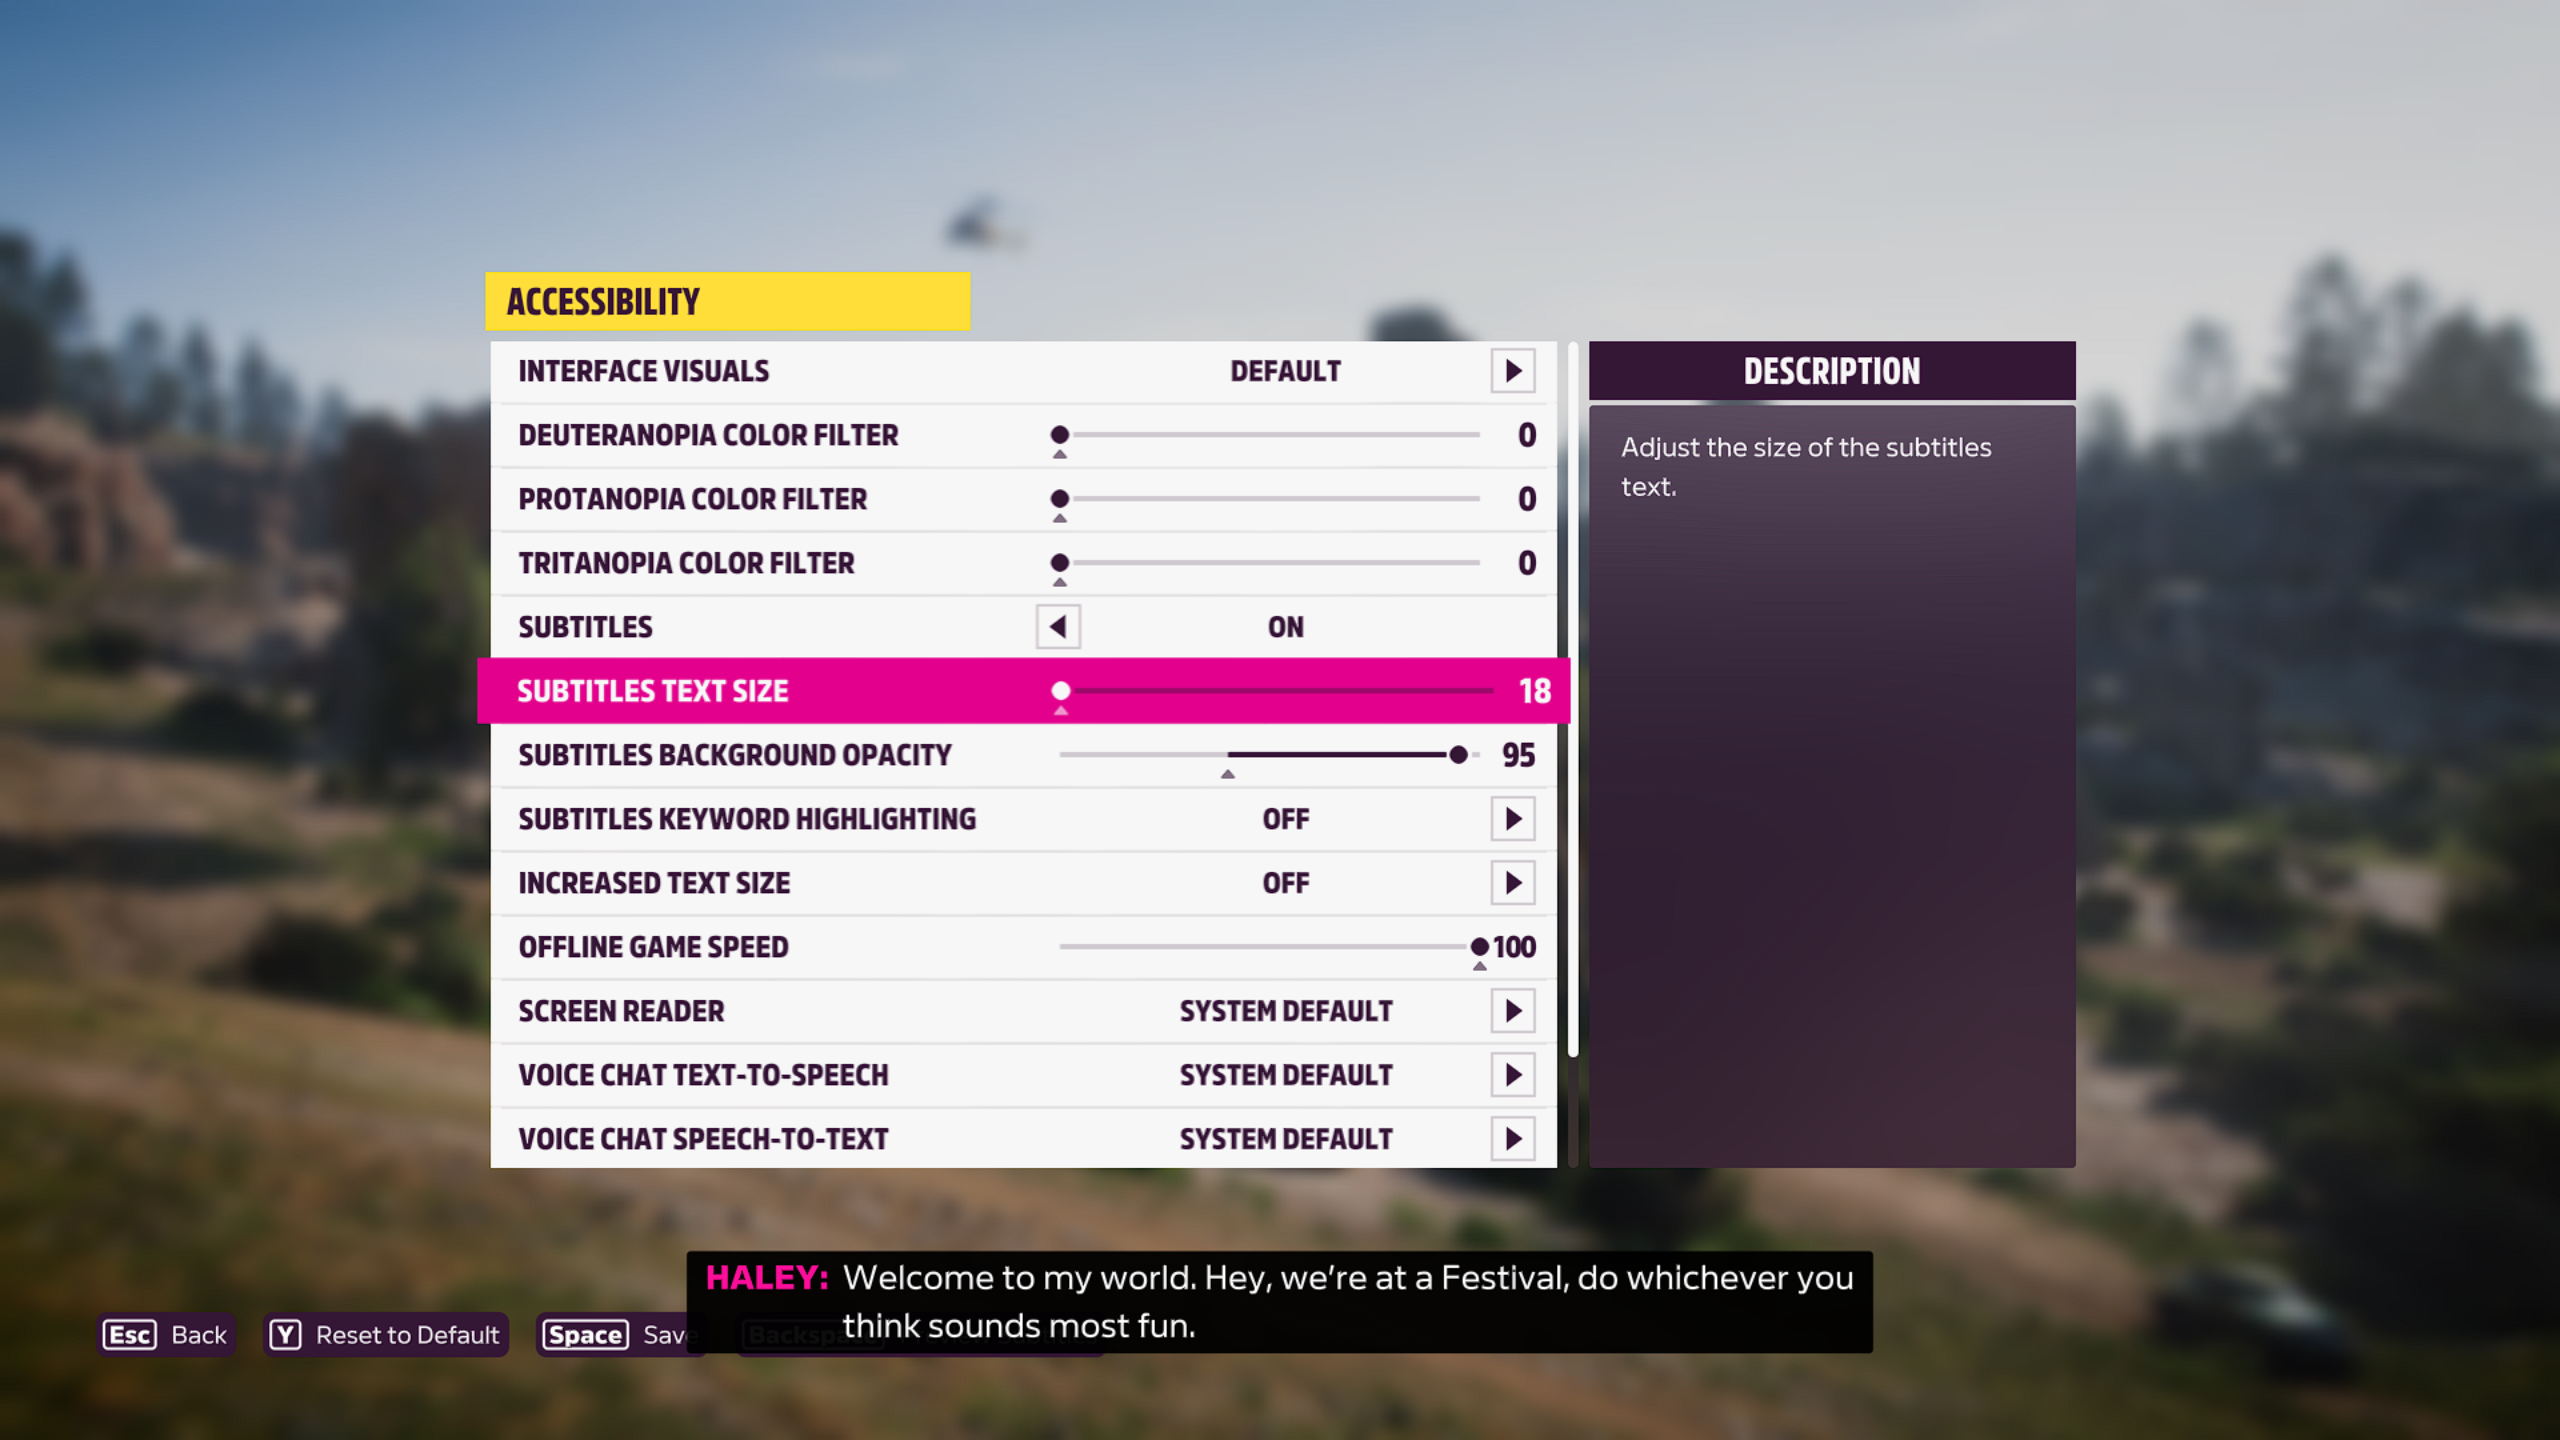 A screenshot that shows the Forza Horizon 5 Accessibility settings menu. The Subtitles Text Size option has focus. A slider to increase and decrease subtitle text size is provided. A preview of the user's current subtitle settings is shown at the bottom of the screen.